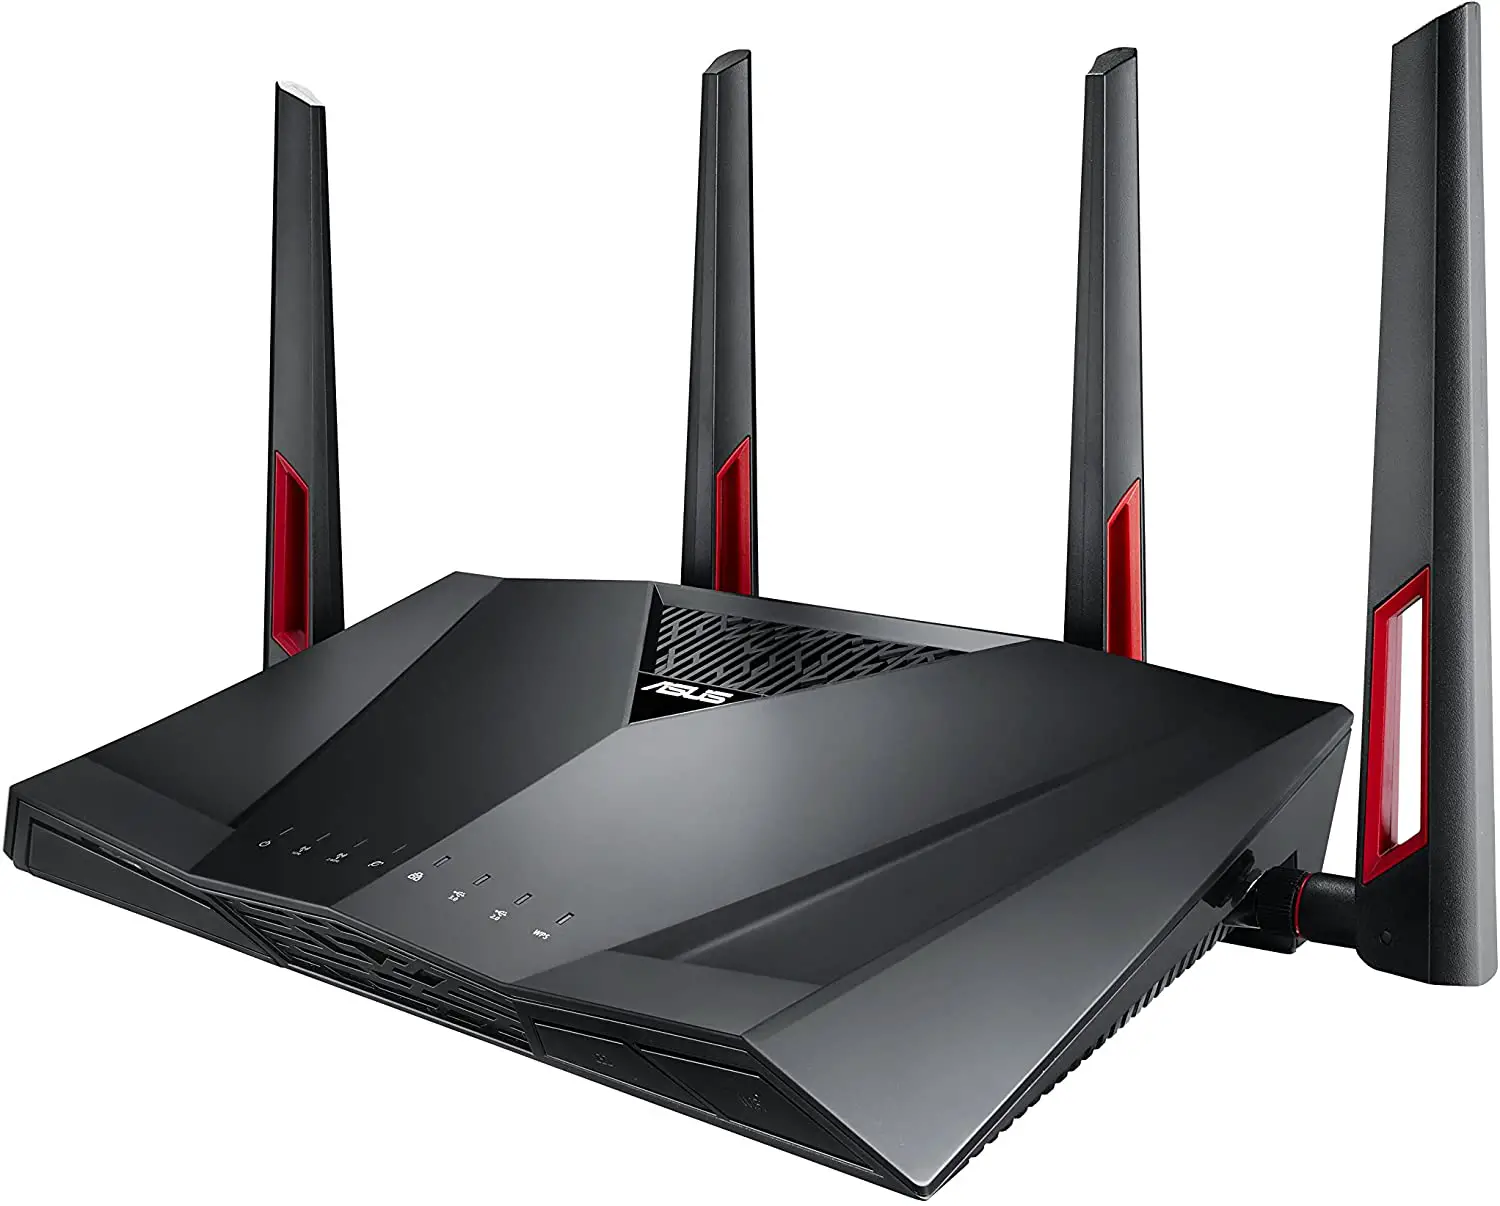 ASUS AC3100 Dual-Band Gigabit WiFi Gaming Router with MU-MIMO